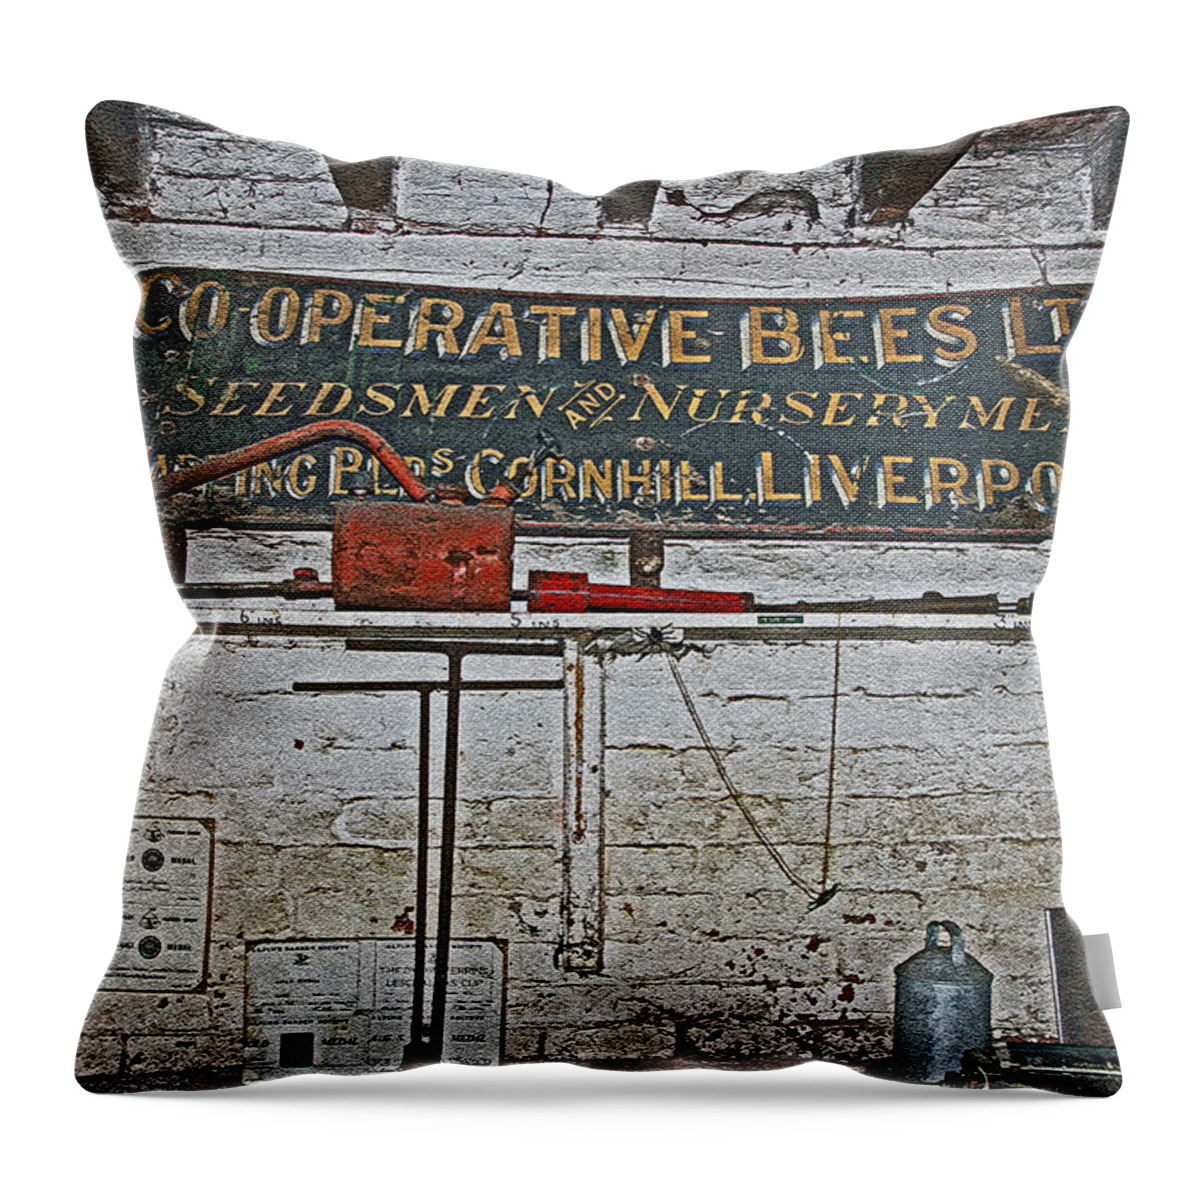 Inside The Man Cave. Throw Pillow featuring the photograph Inside the Man Cave. by Lachlan Main